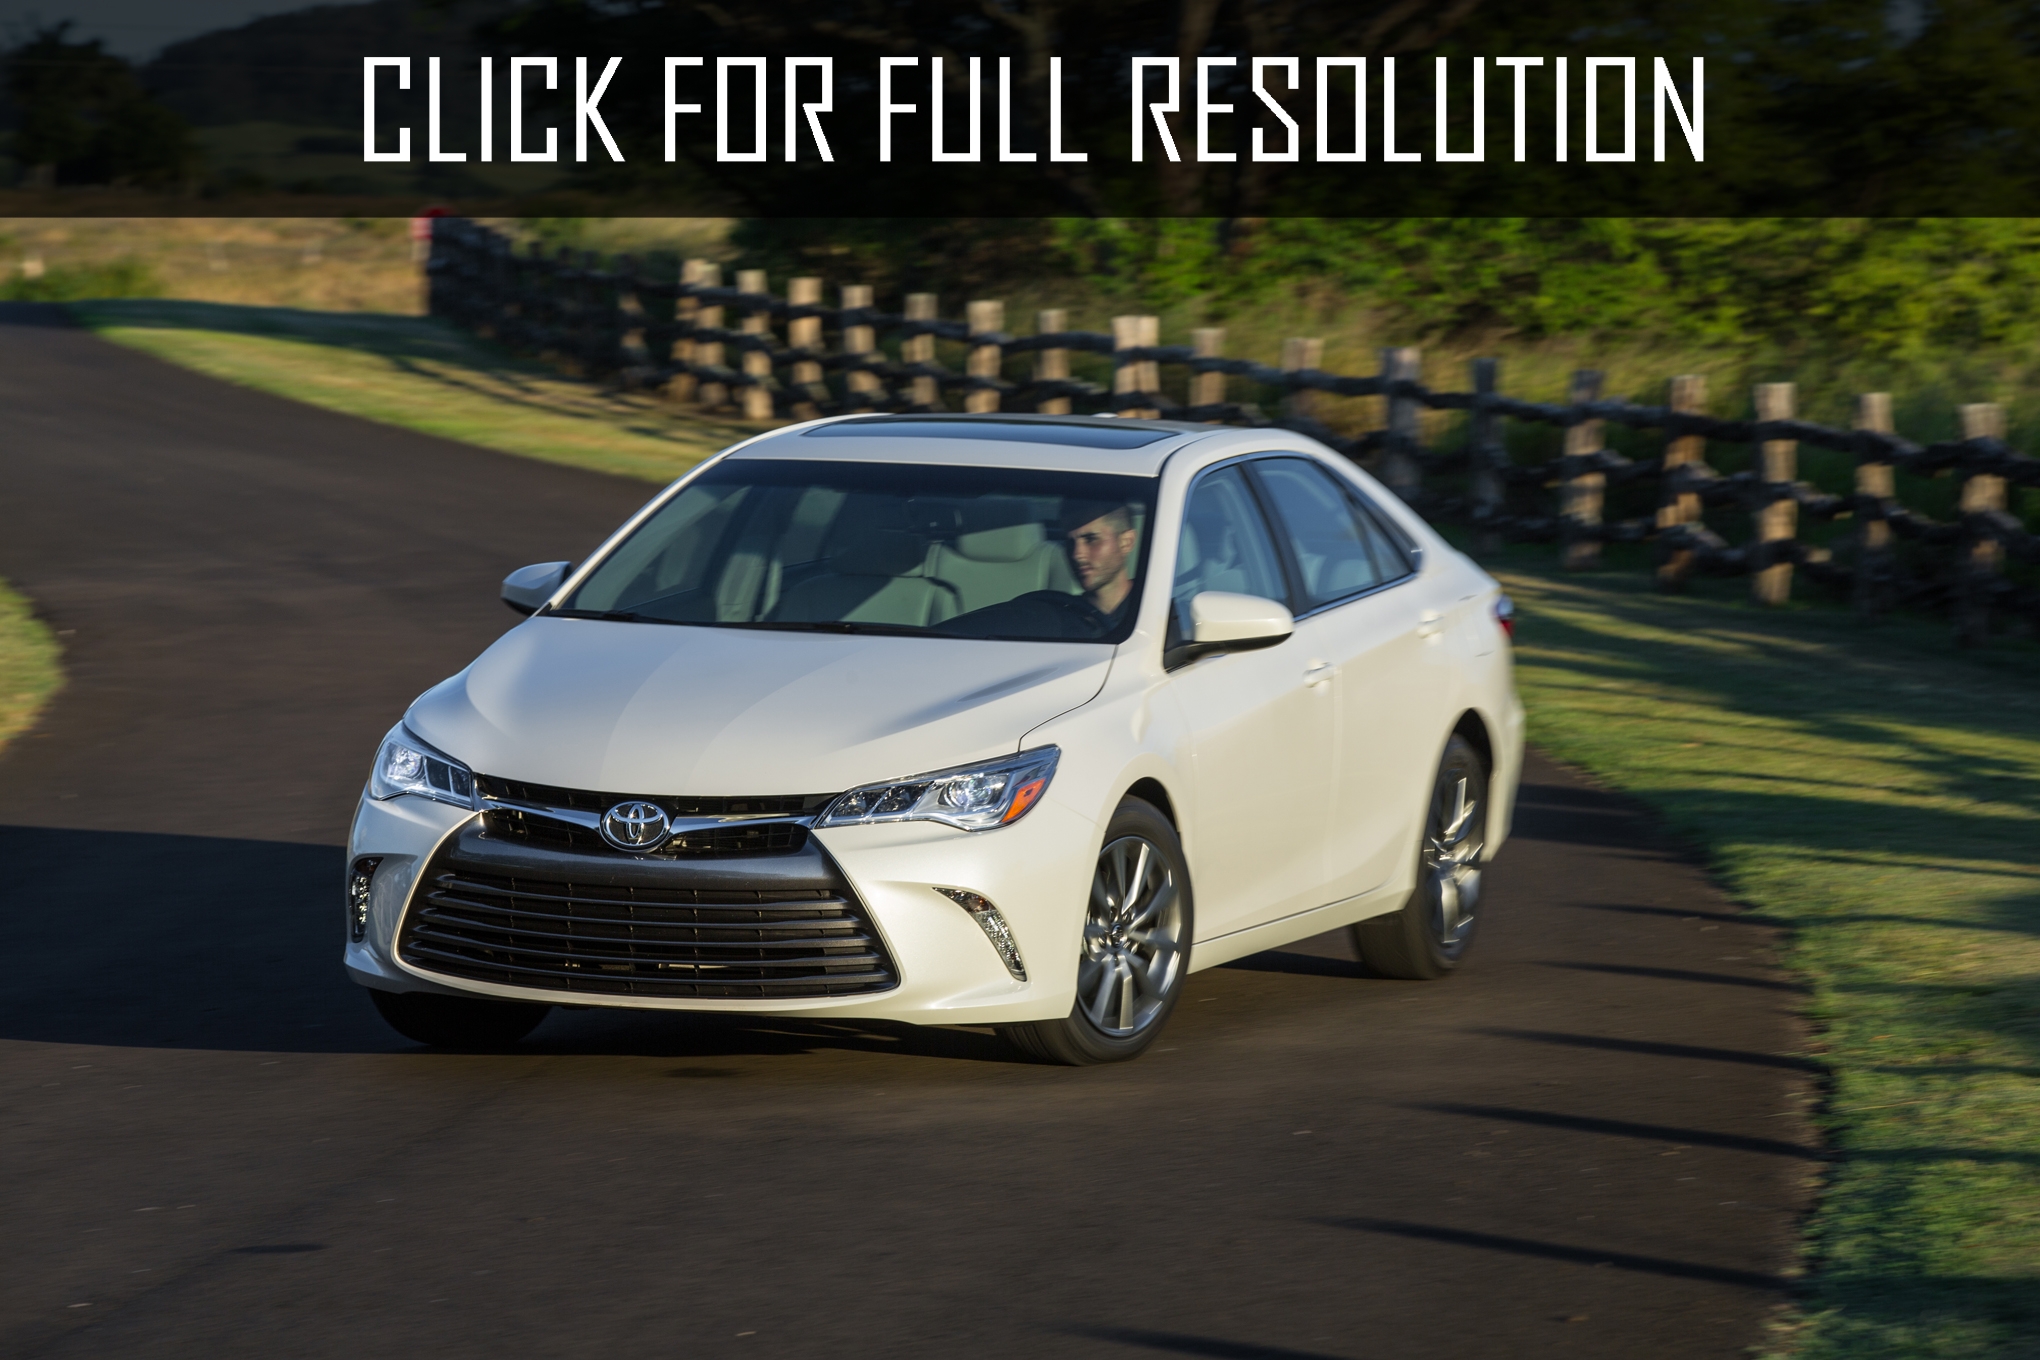 2015 Toyota Camry Le news, reviews, msrp, ratings with amazing images